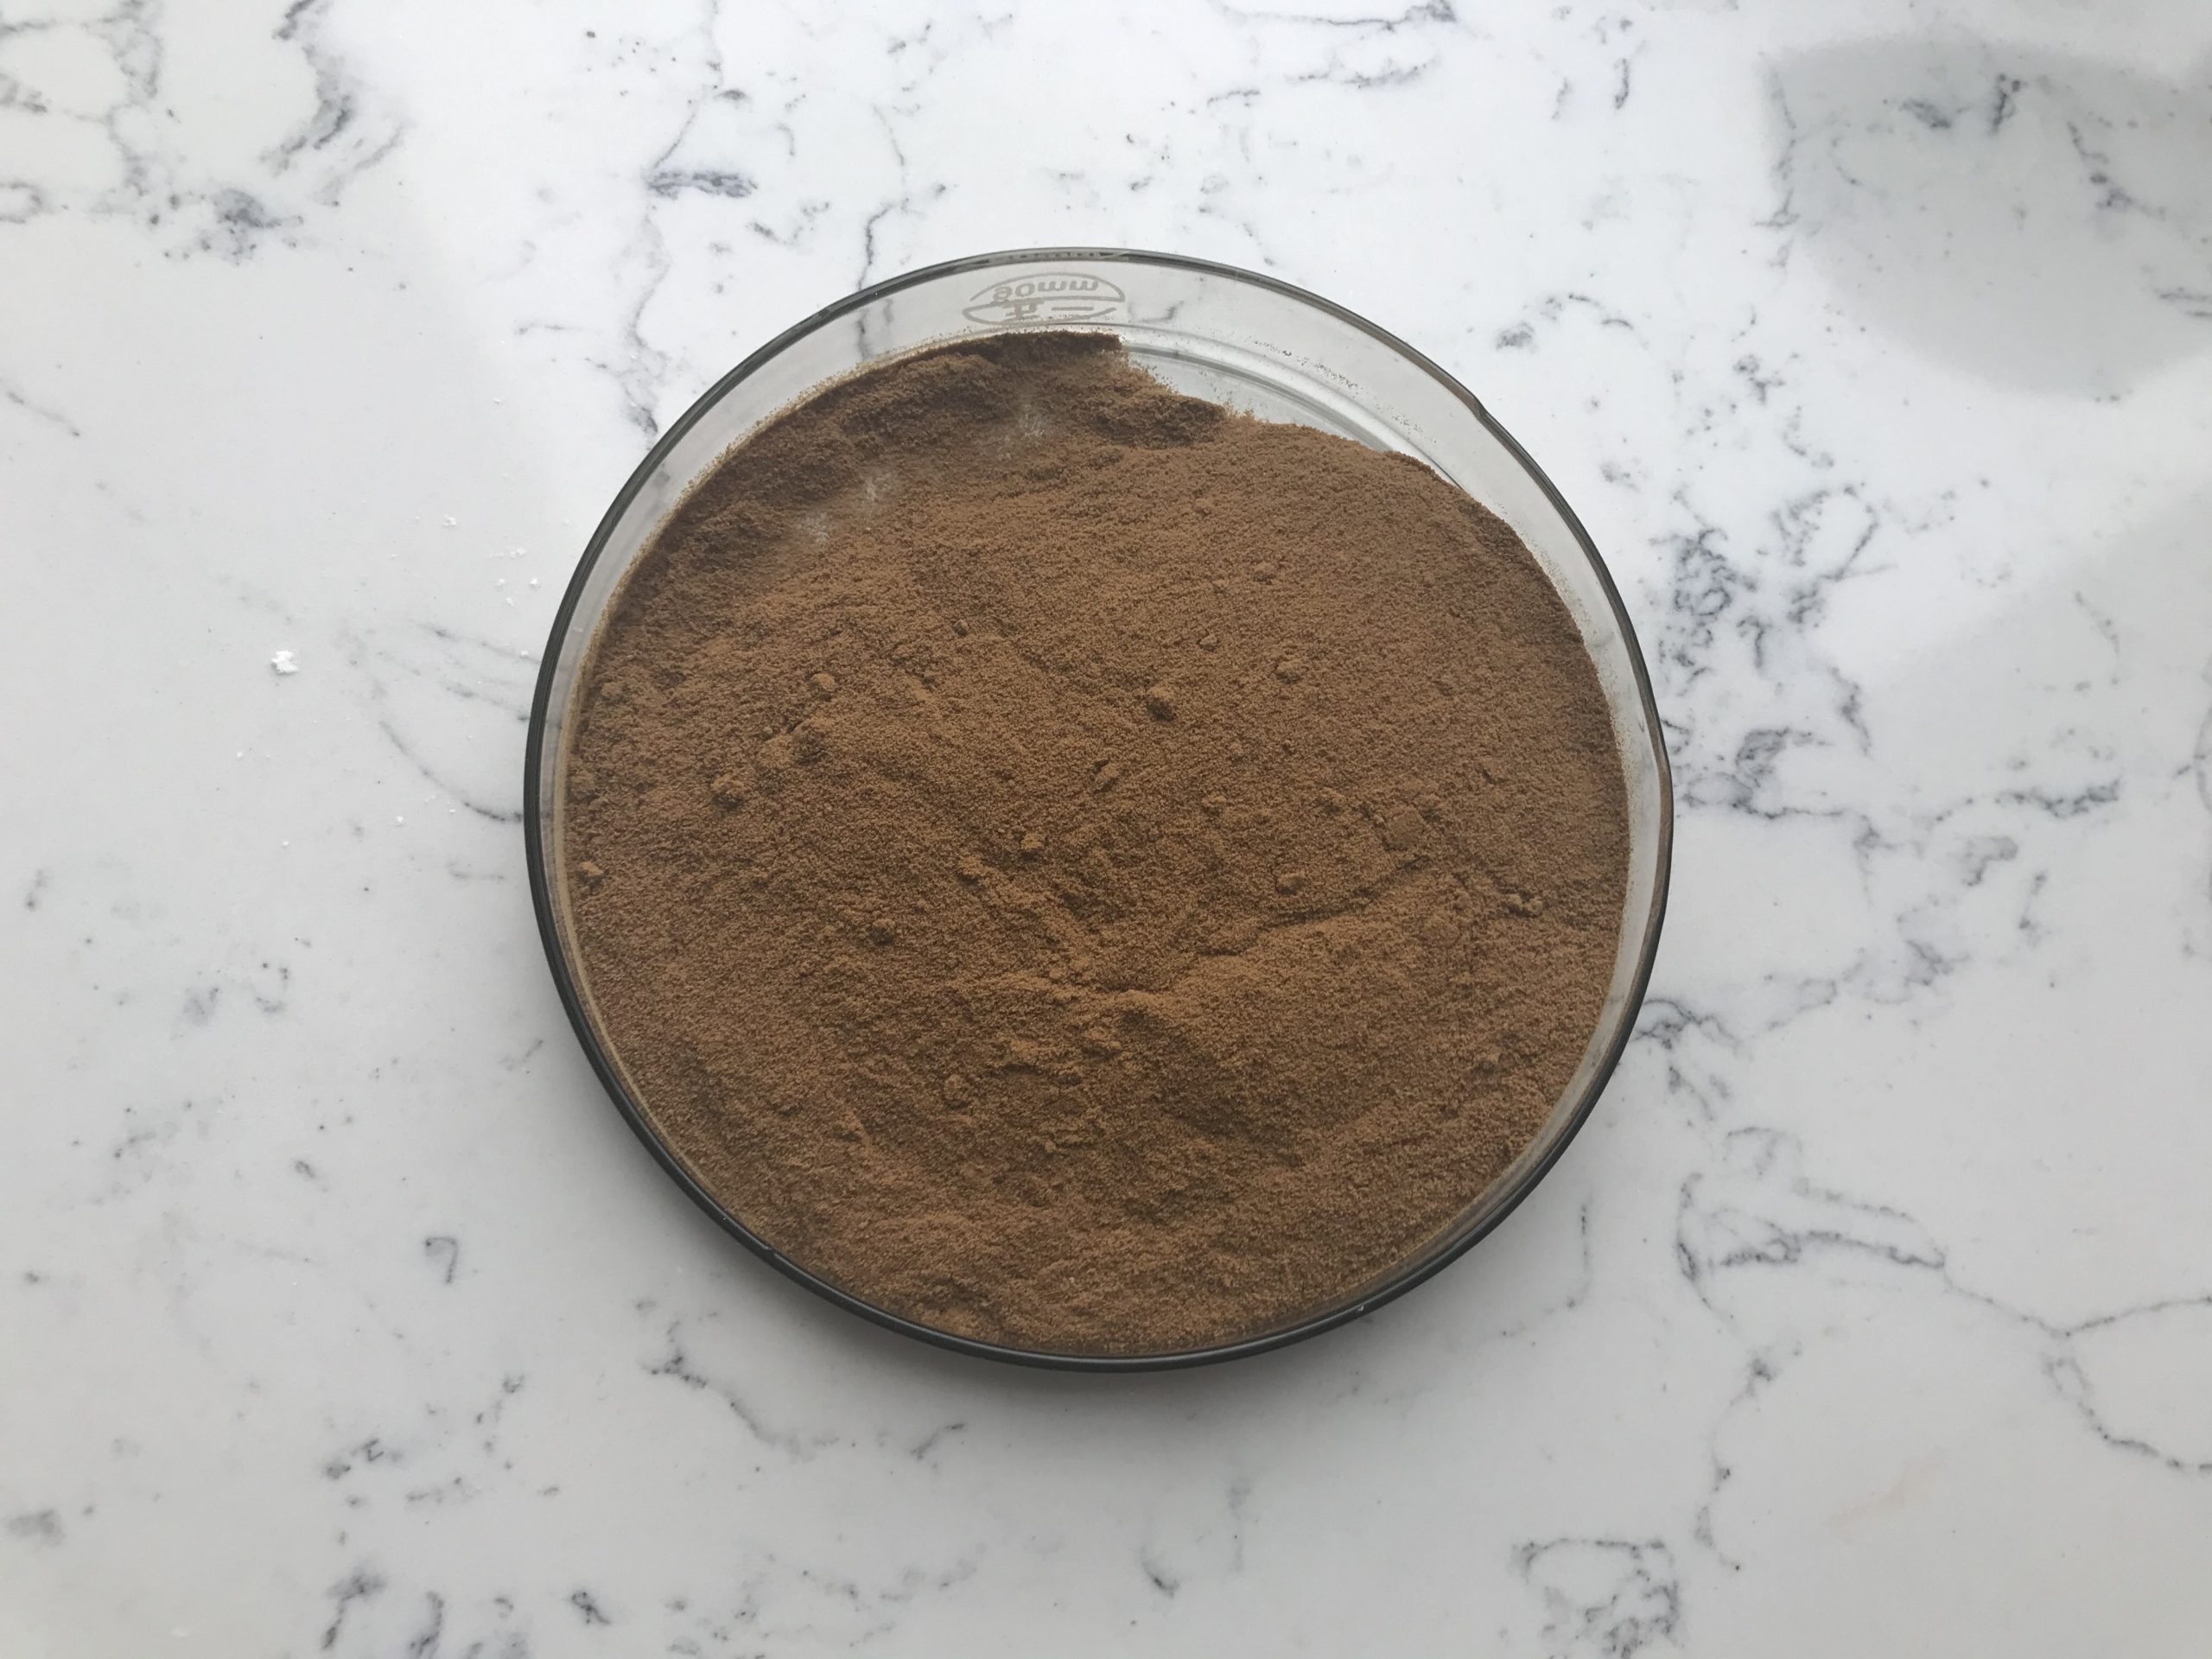 Ashwagandha Extract quality and production-Xi'an Lyphar Biotech Co., Ltd